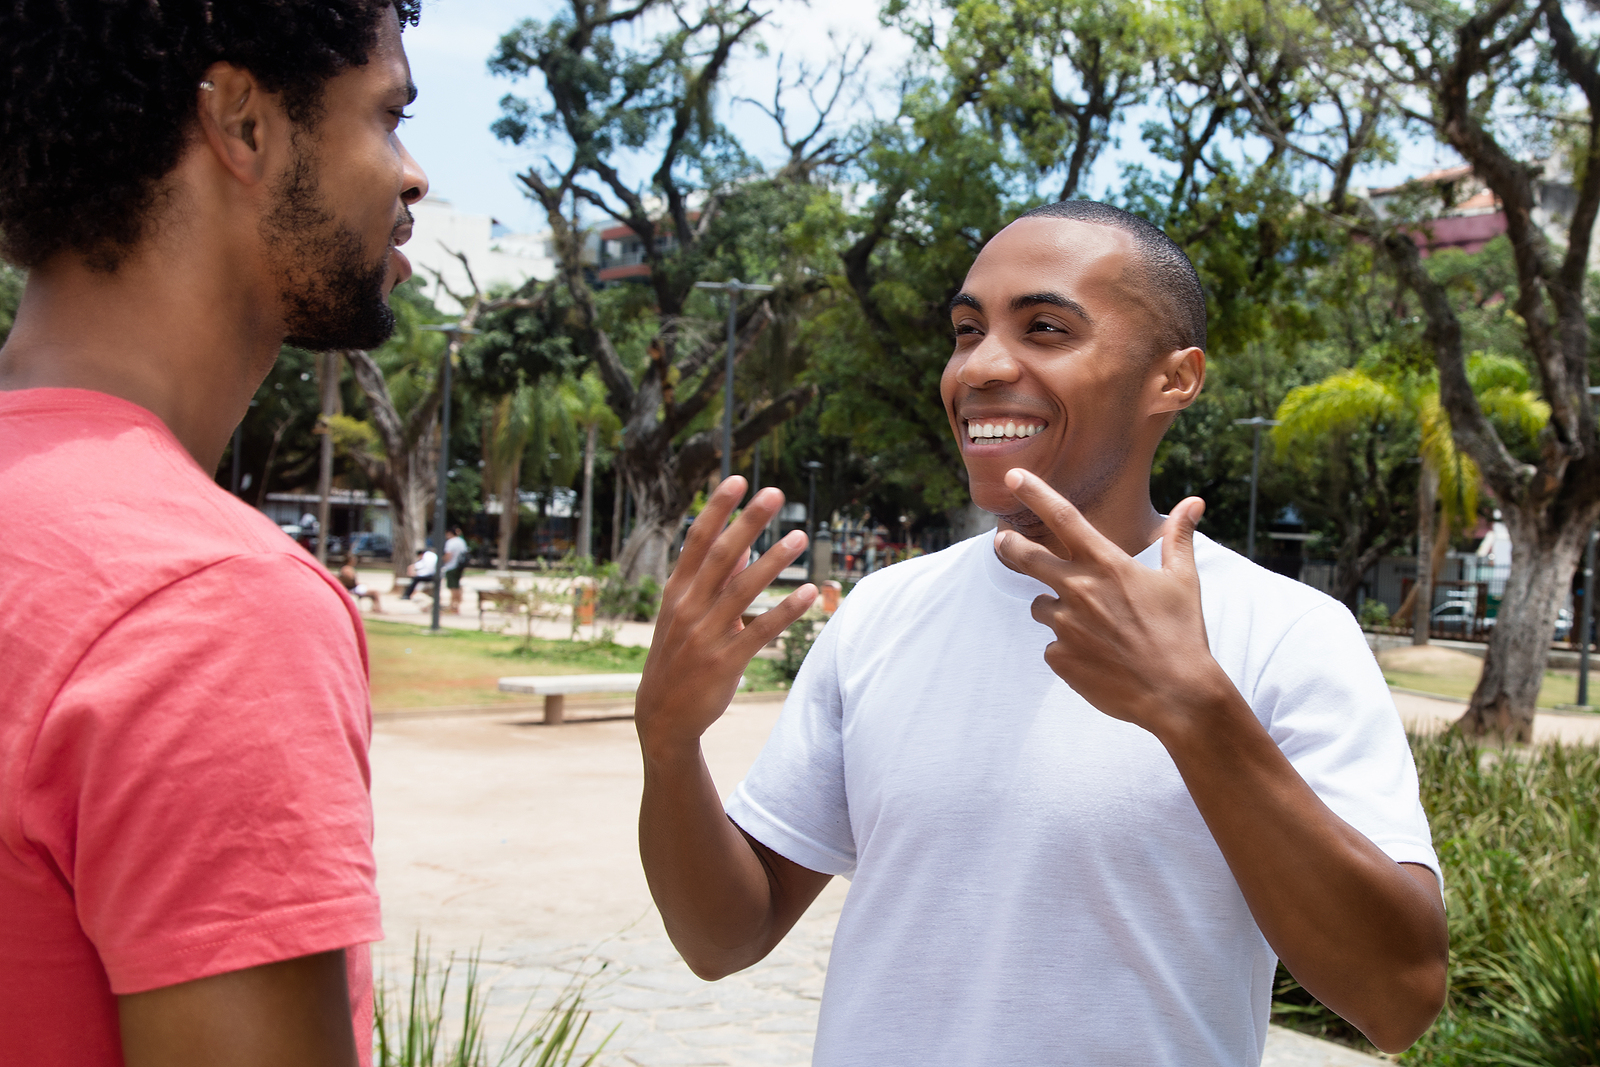 Two young black men talk with eachother outdoors near a park. One is using his hands to speak and smiling.